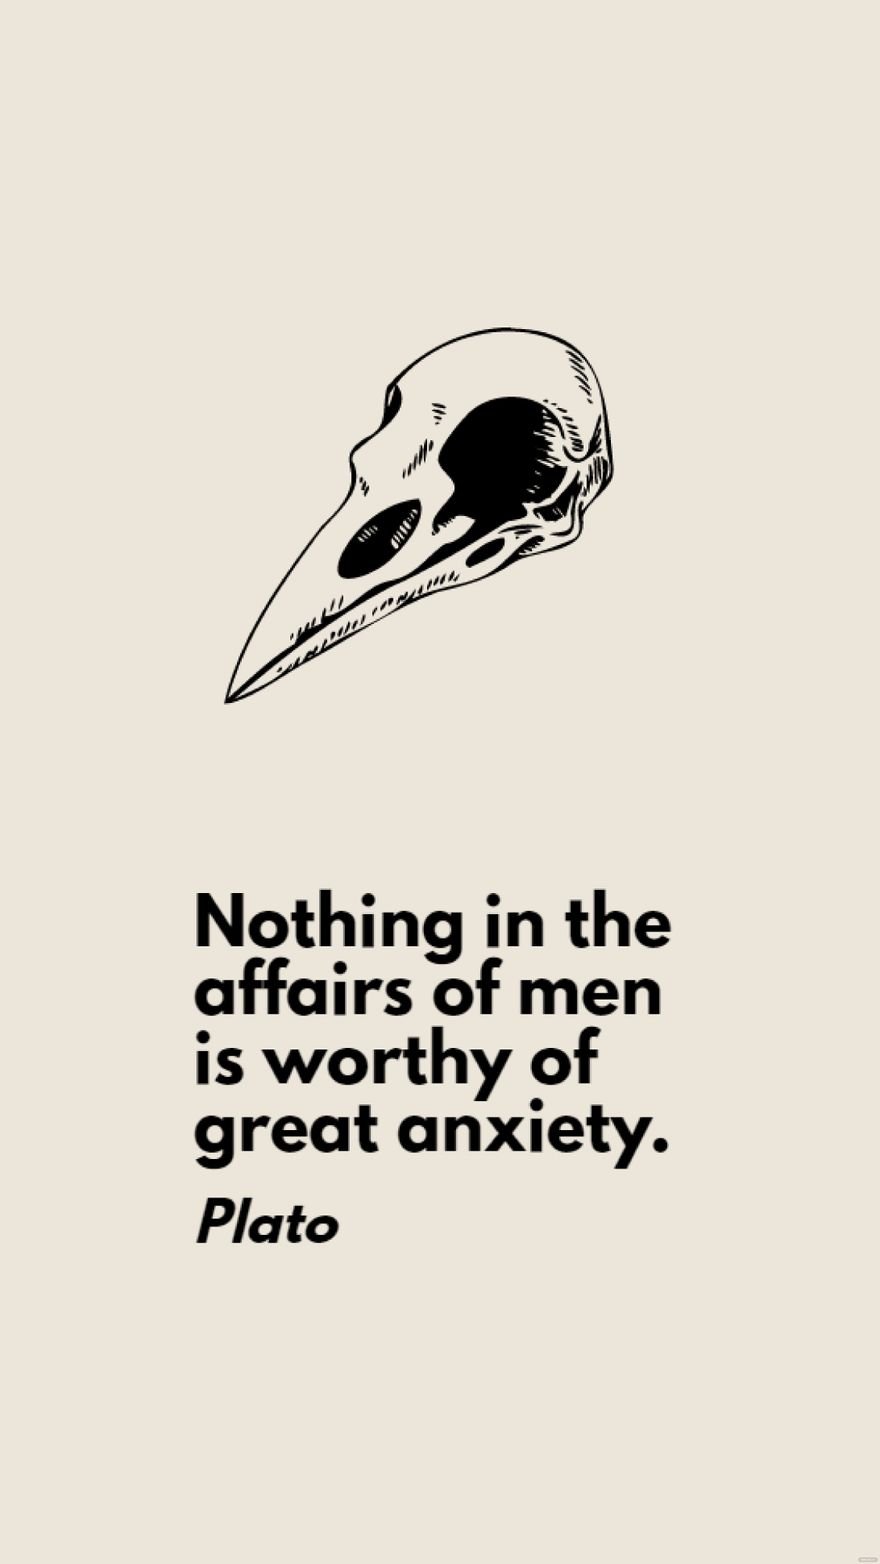 Plato - Nothing in the affairs of men is worthy of great anxiety. in JPG